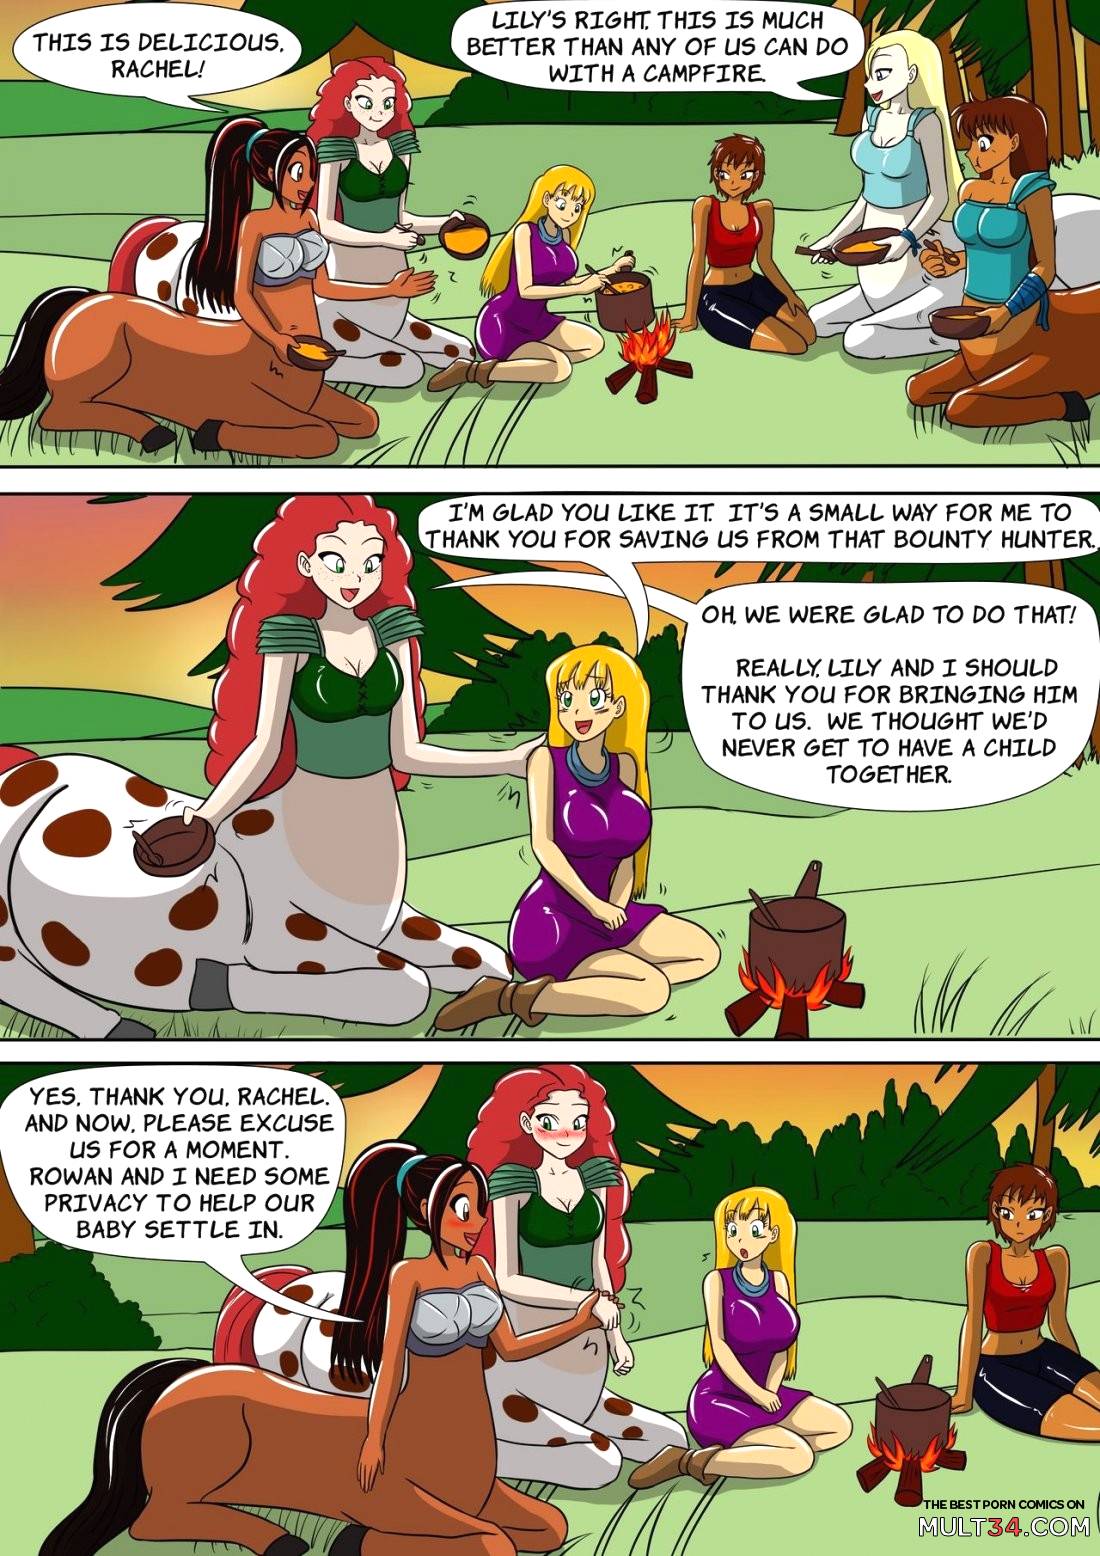 The Centaur's Protective Womb page 15